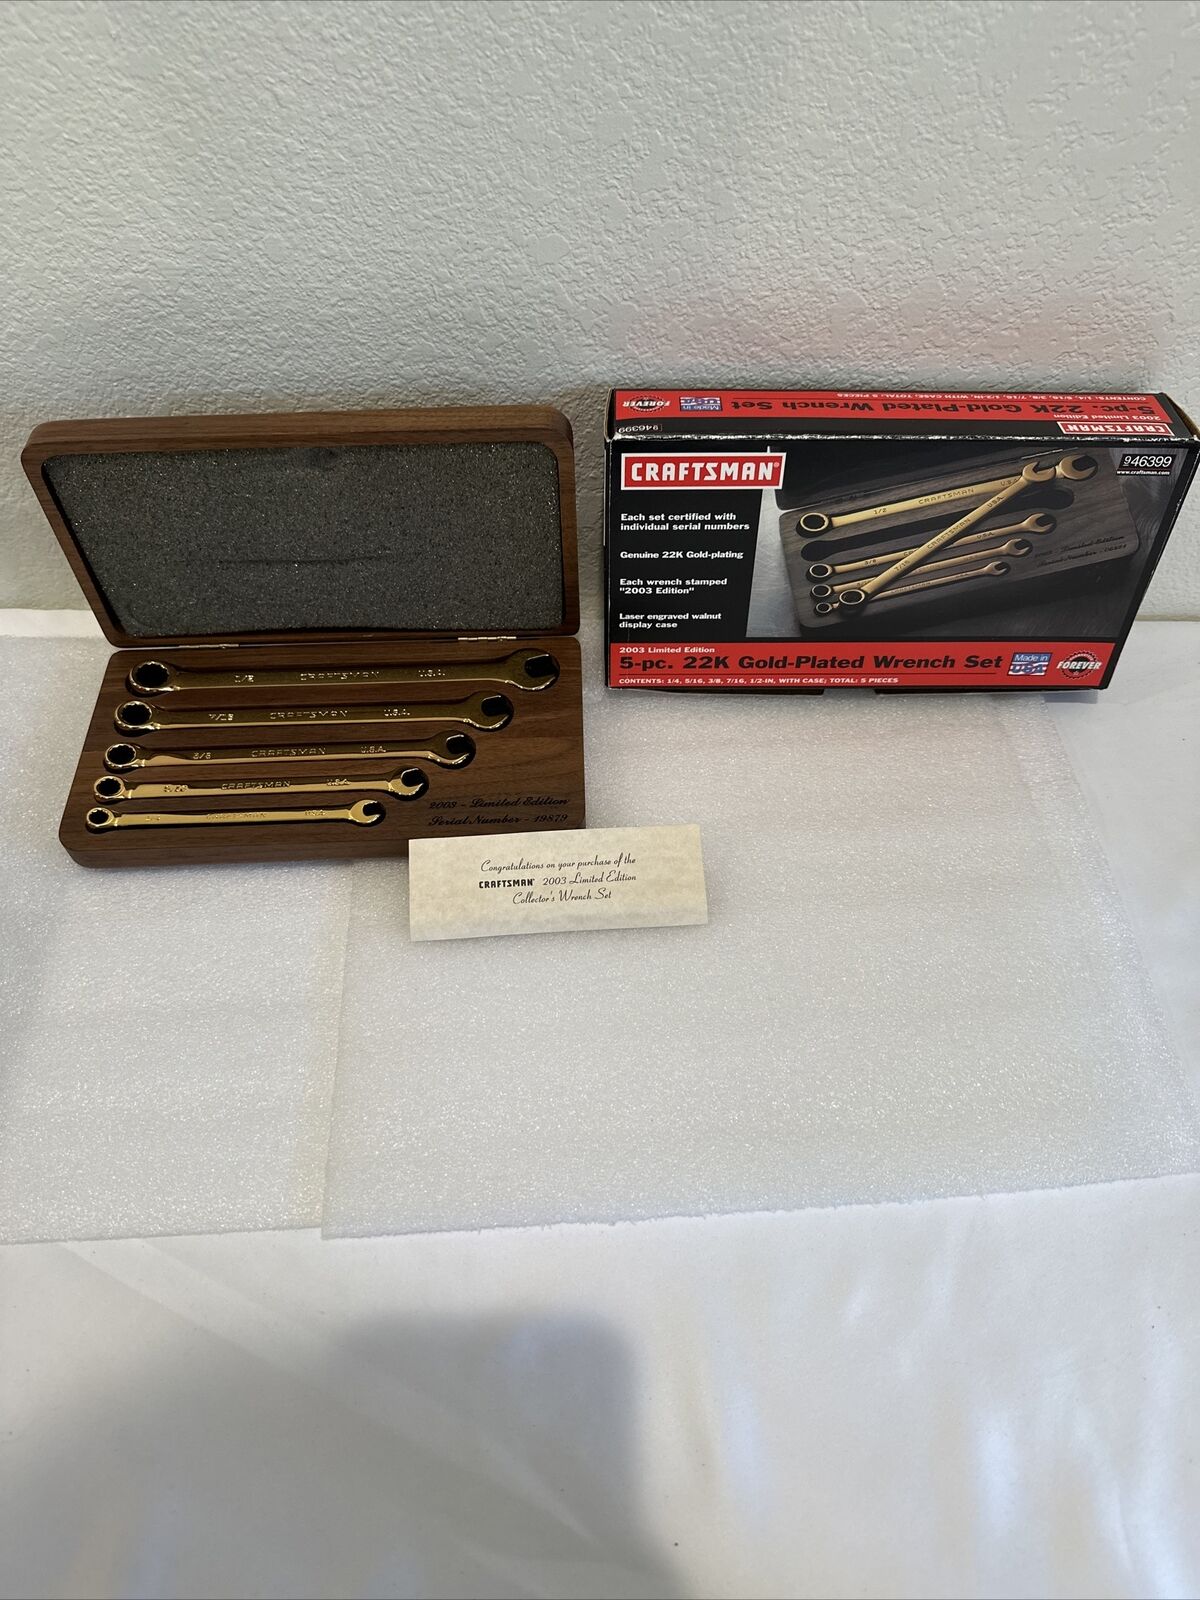 2003 Craftsman 22K Gold Plated 5pc Collectors Wrench Set Limited Edition